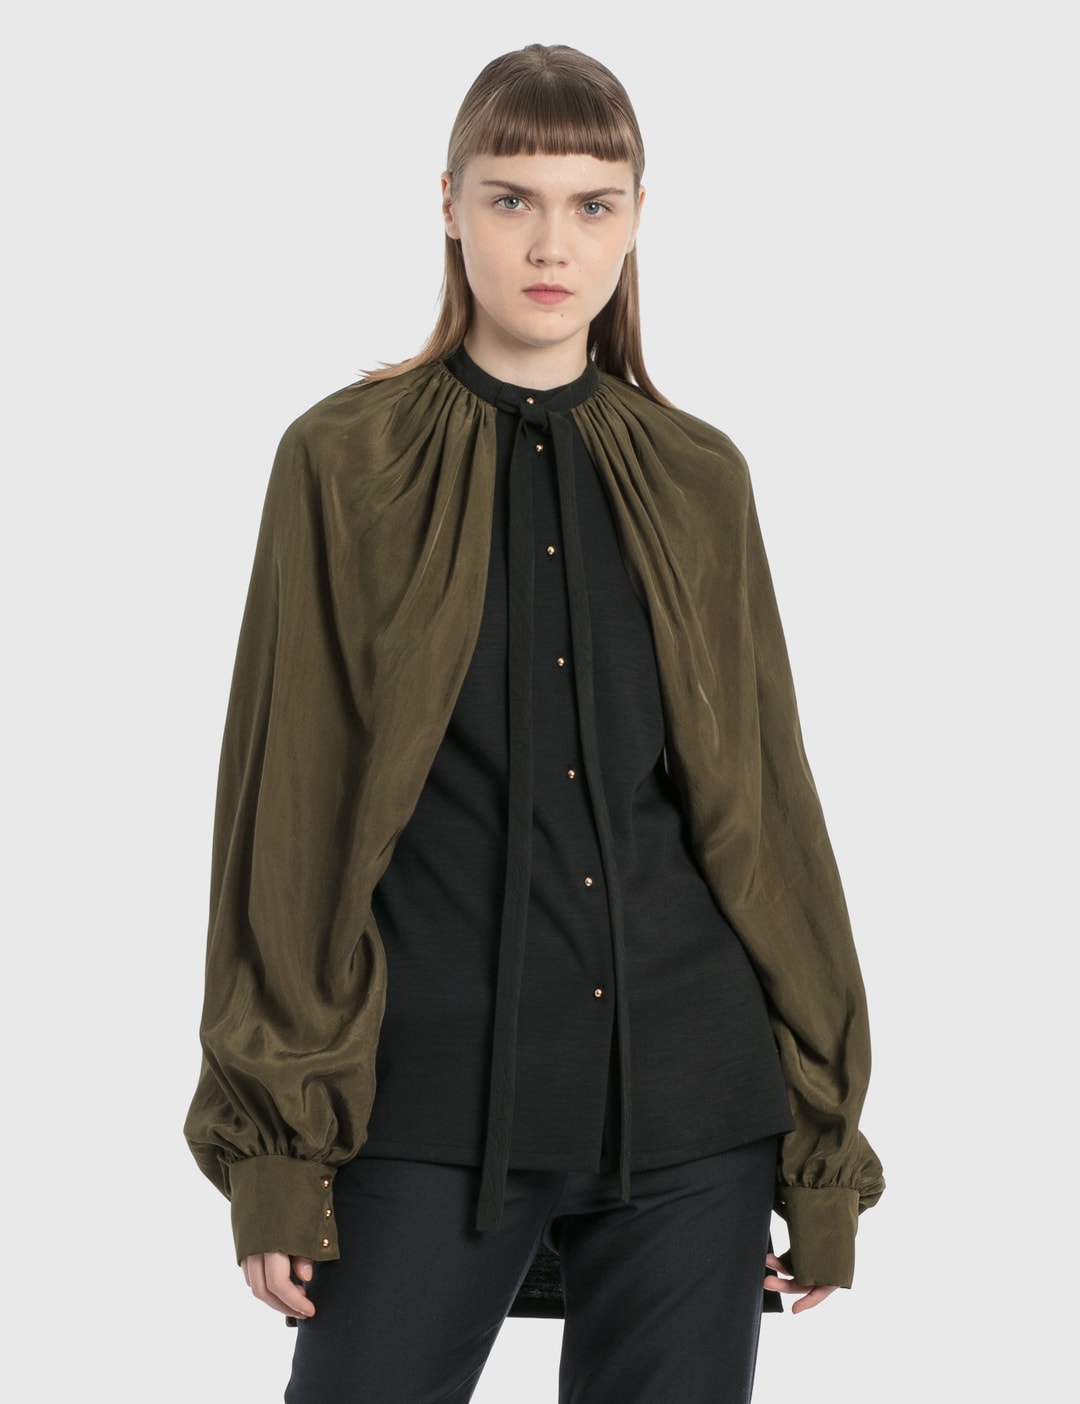 Loewe - Cape Sleeve Blouse | HBX - Globally Curated Fashion and ...